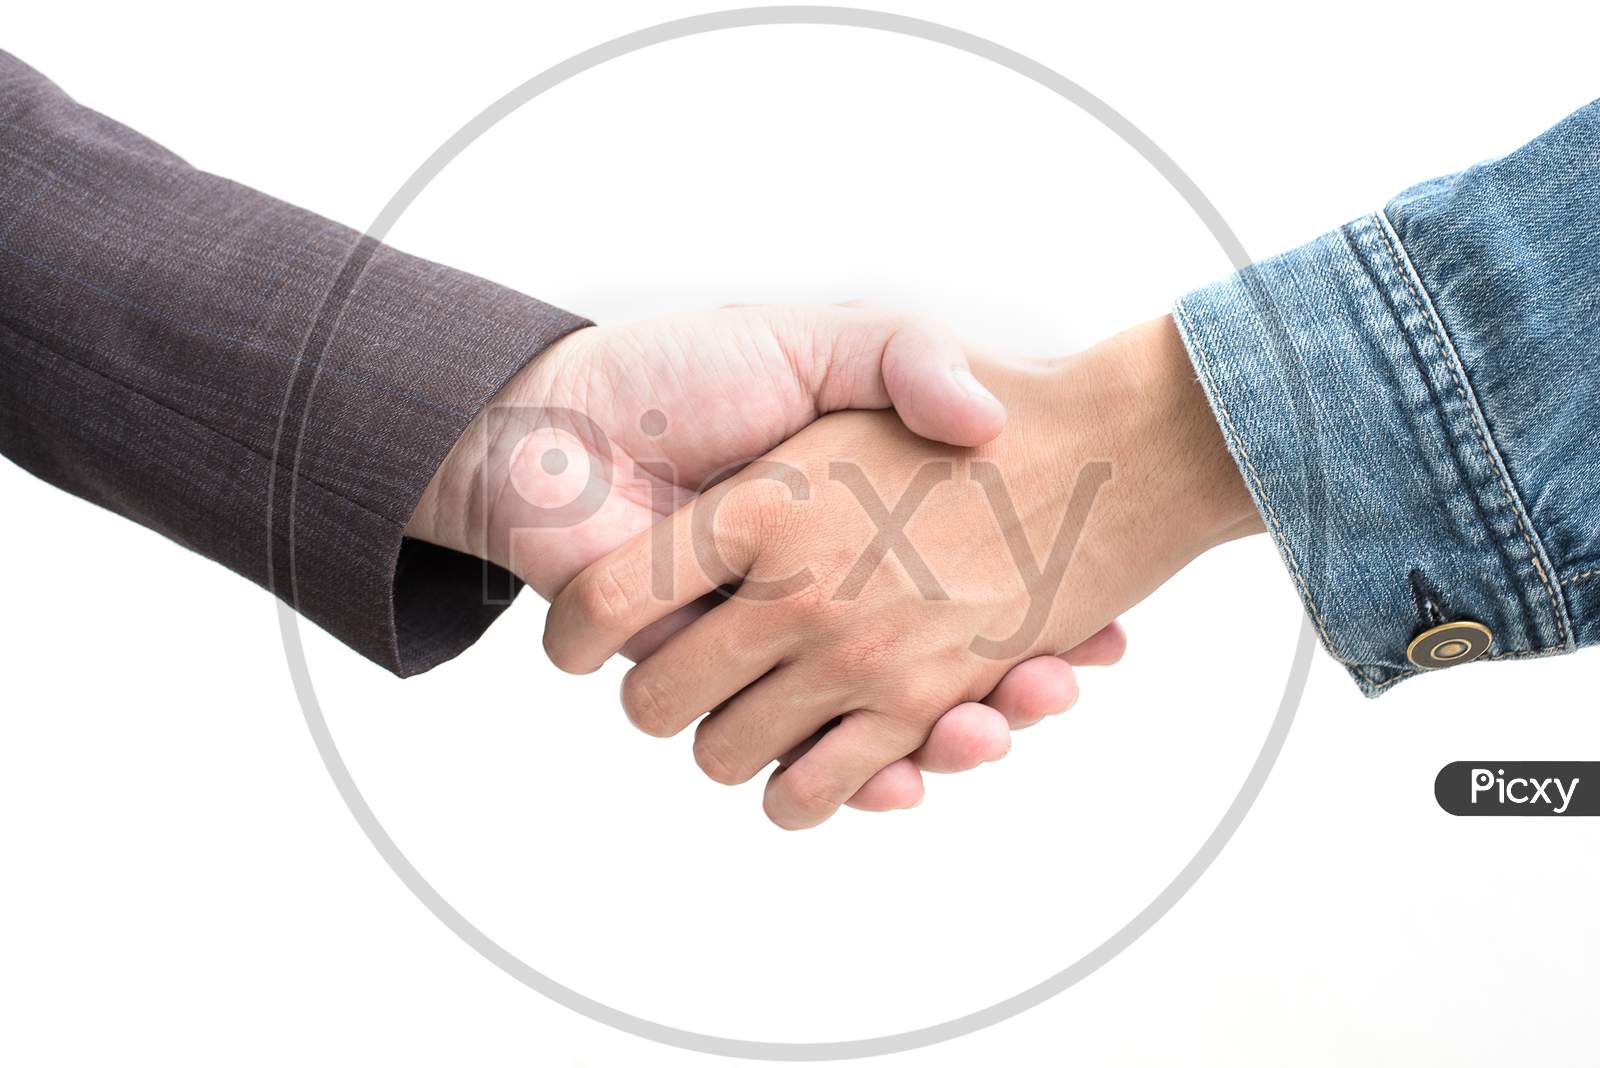 Hands Shake Of Businessmen  On Isolated White Background.  Business And Success Concept, Front View